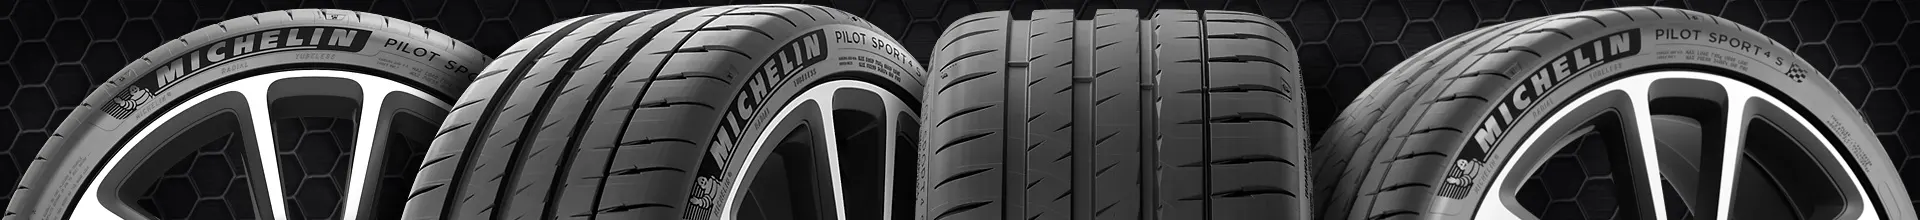 285 75 16 discount tires from Online Wheels Direct